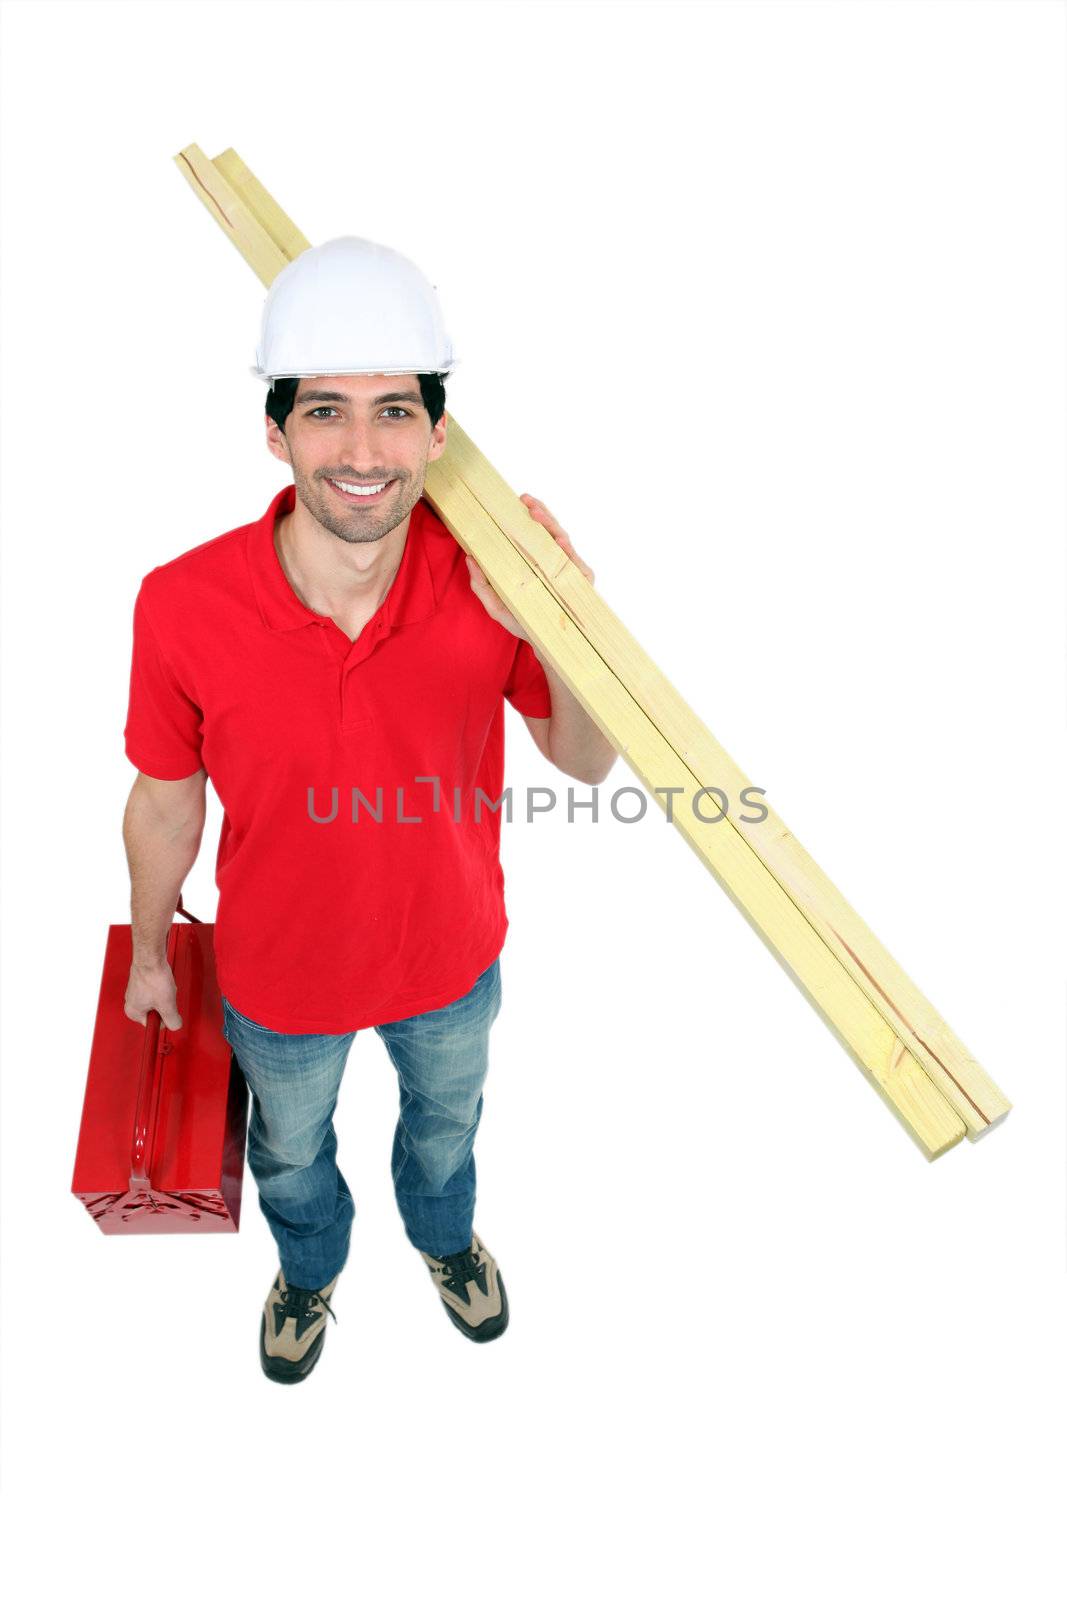 Builder with timber and a toolbox by phovoir